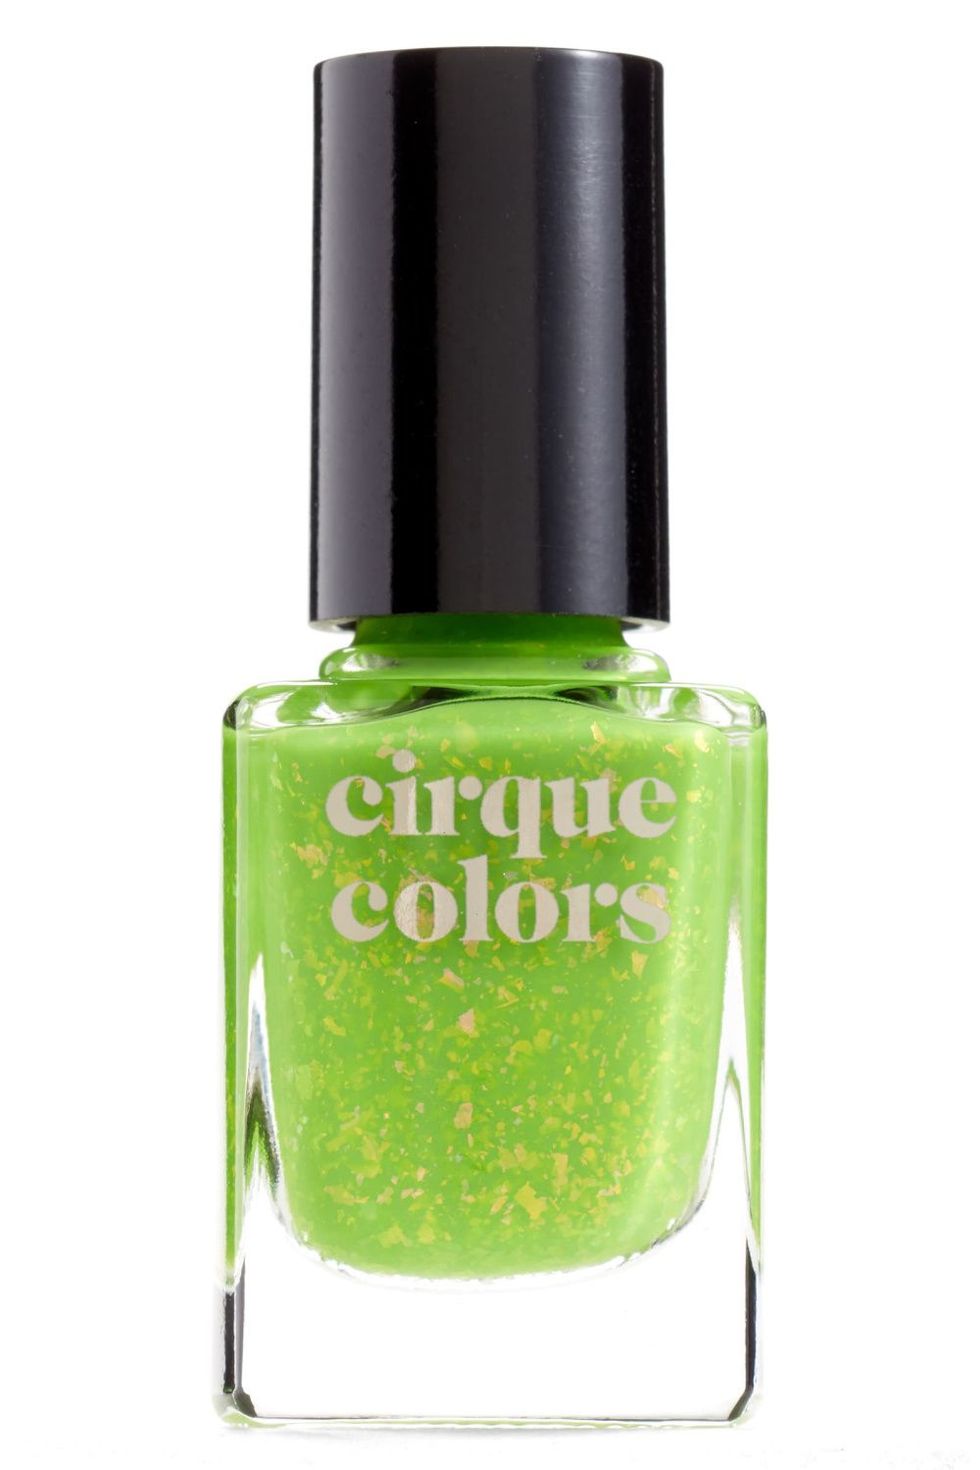 Cirque Colors Iridescent Nail Polish in Sour Punch